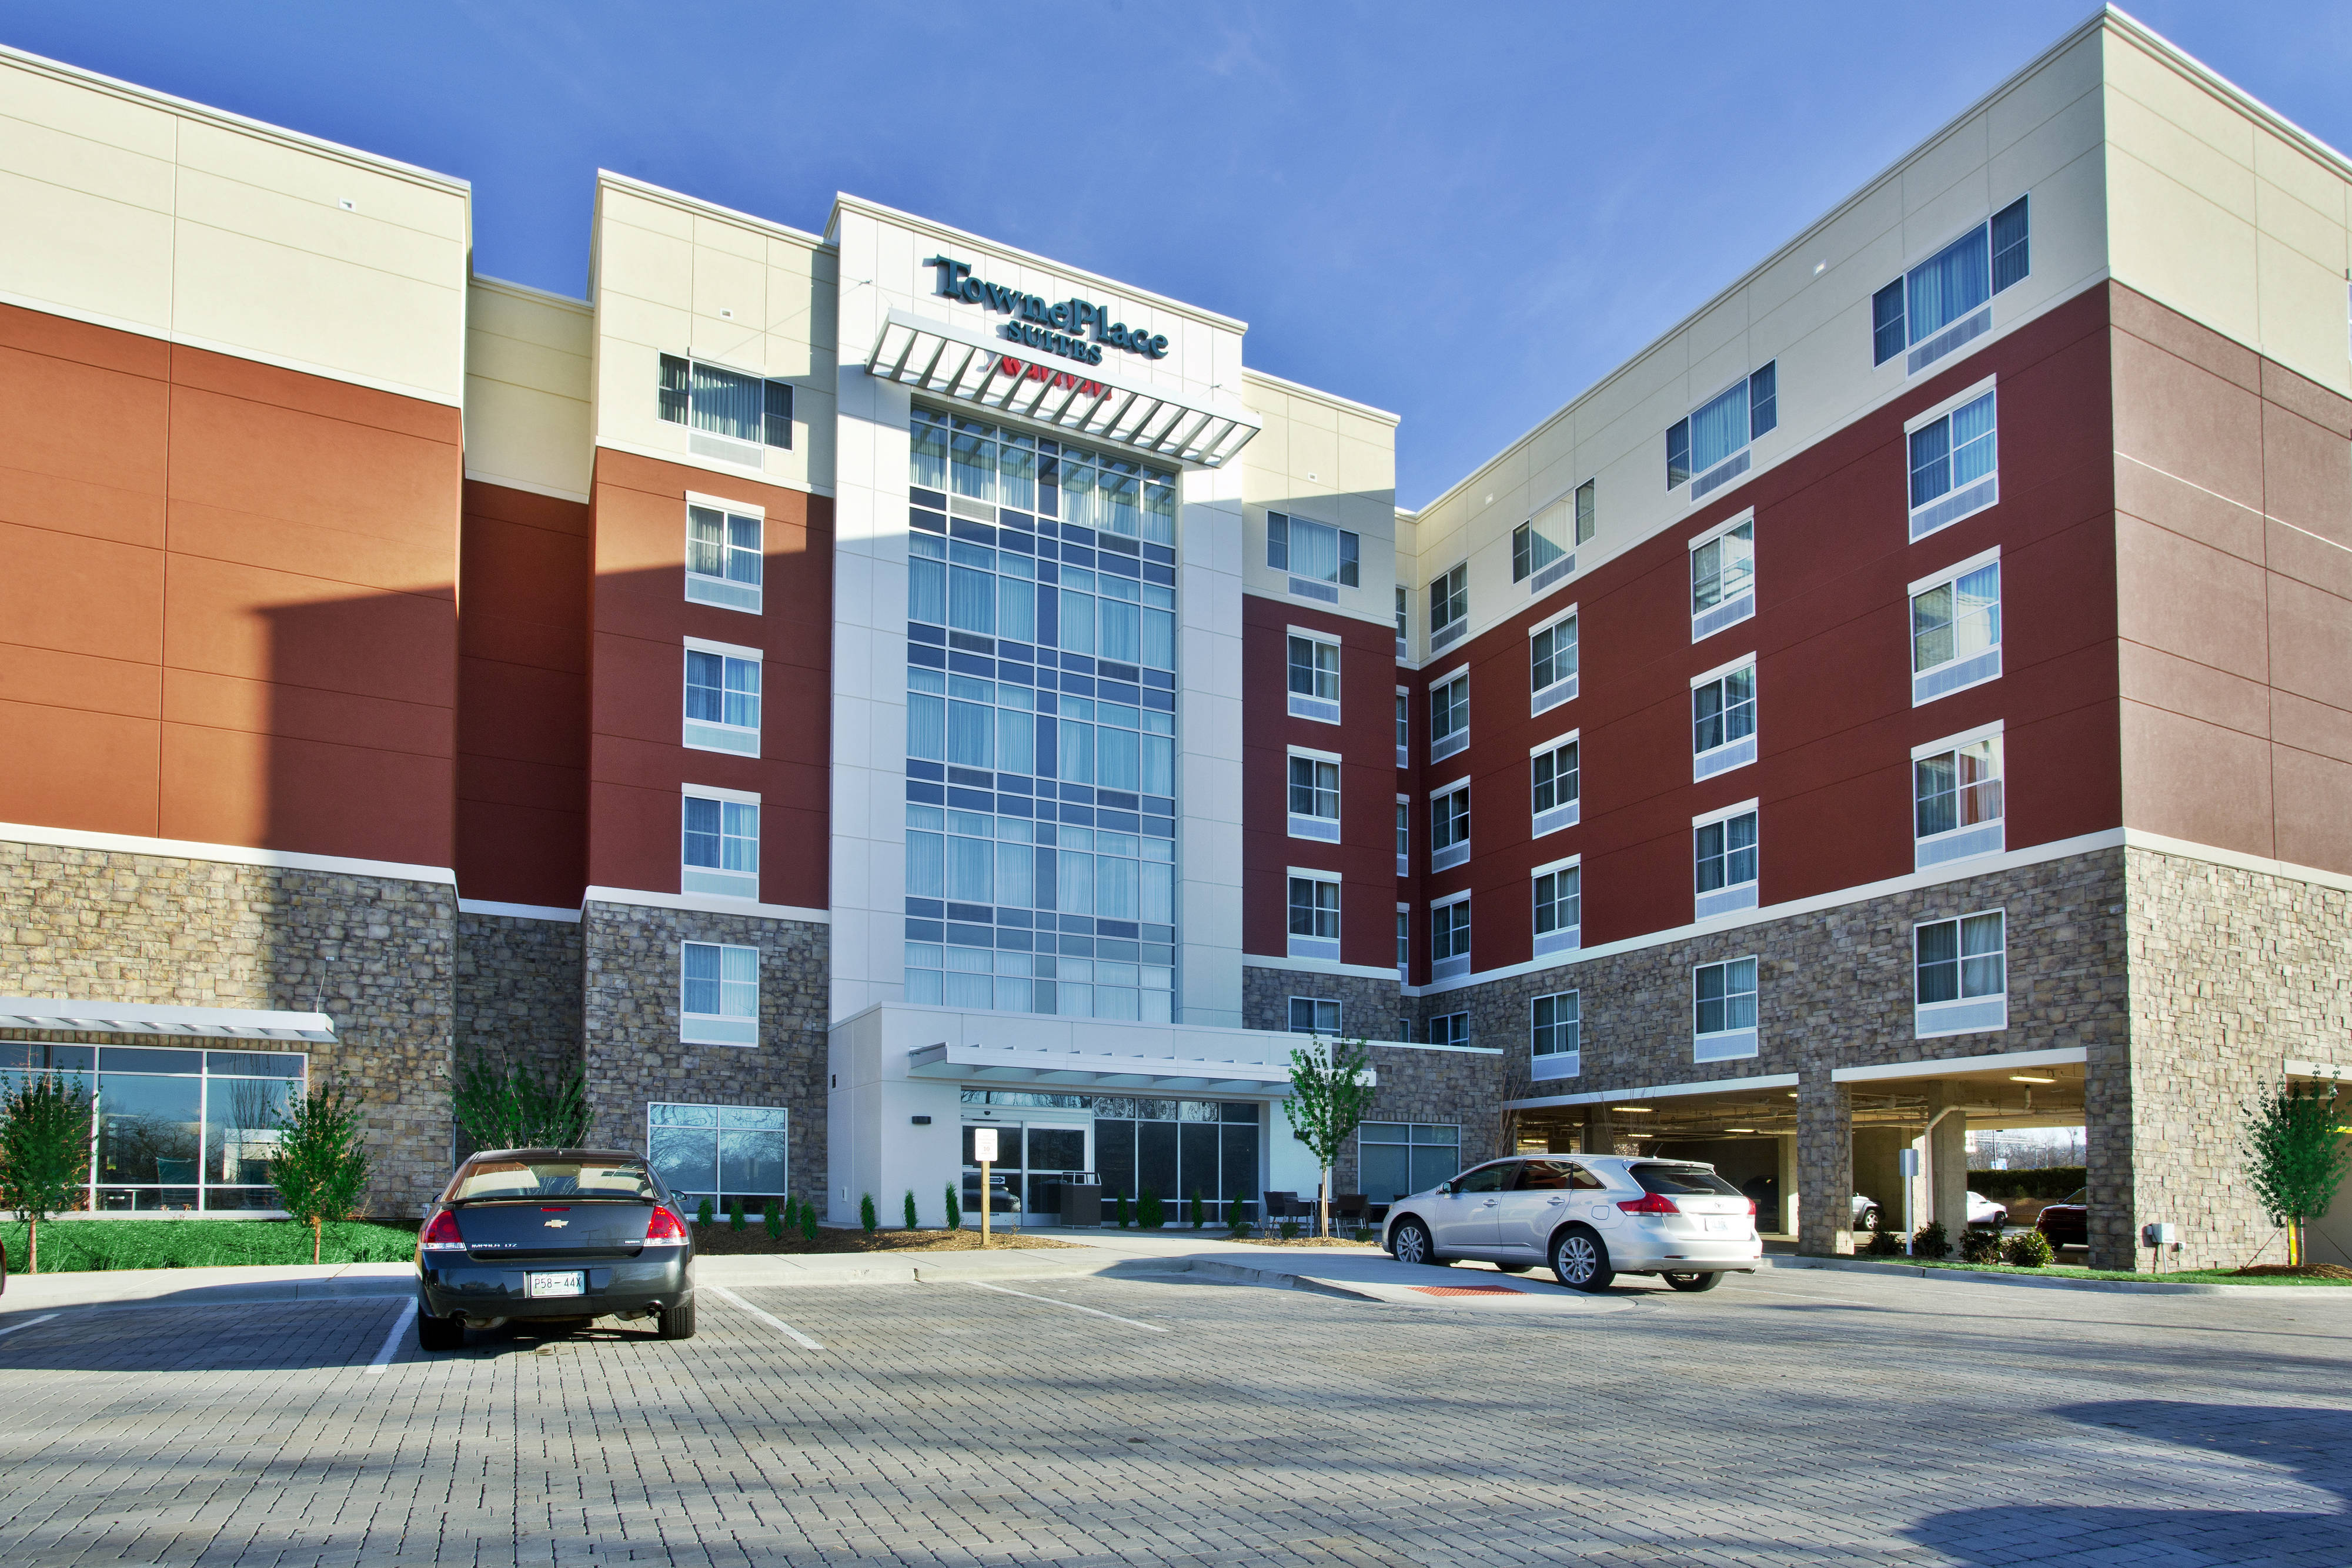 Photo of TownePlace Suites Franklin Cool Springs, Franklin, TN